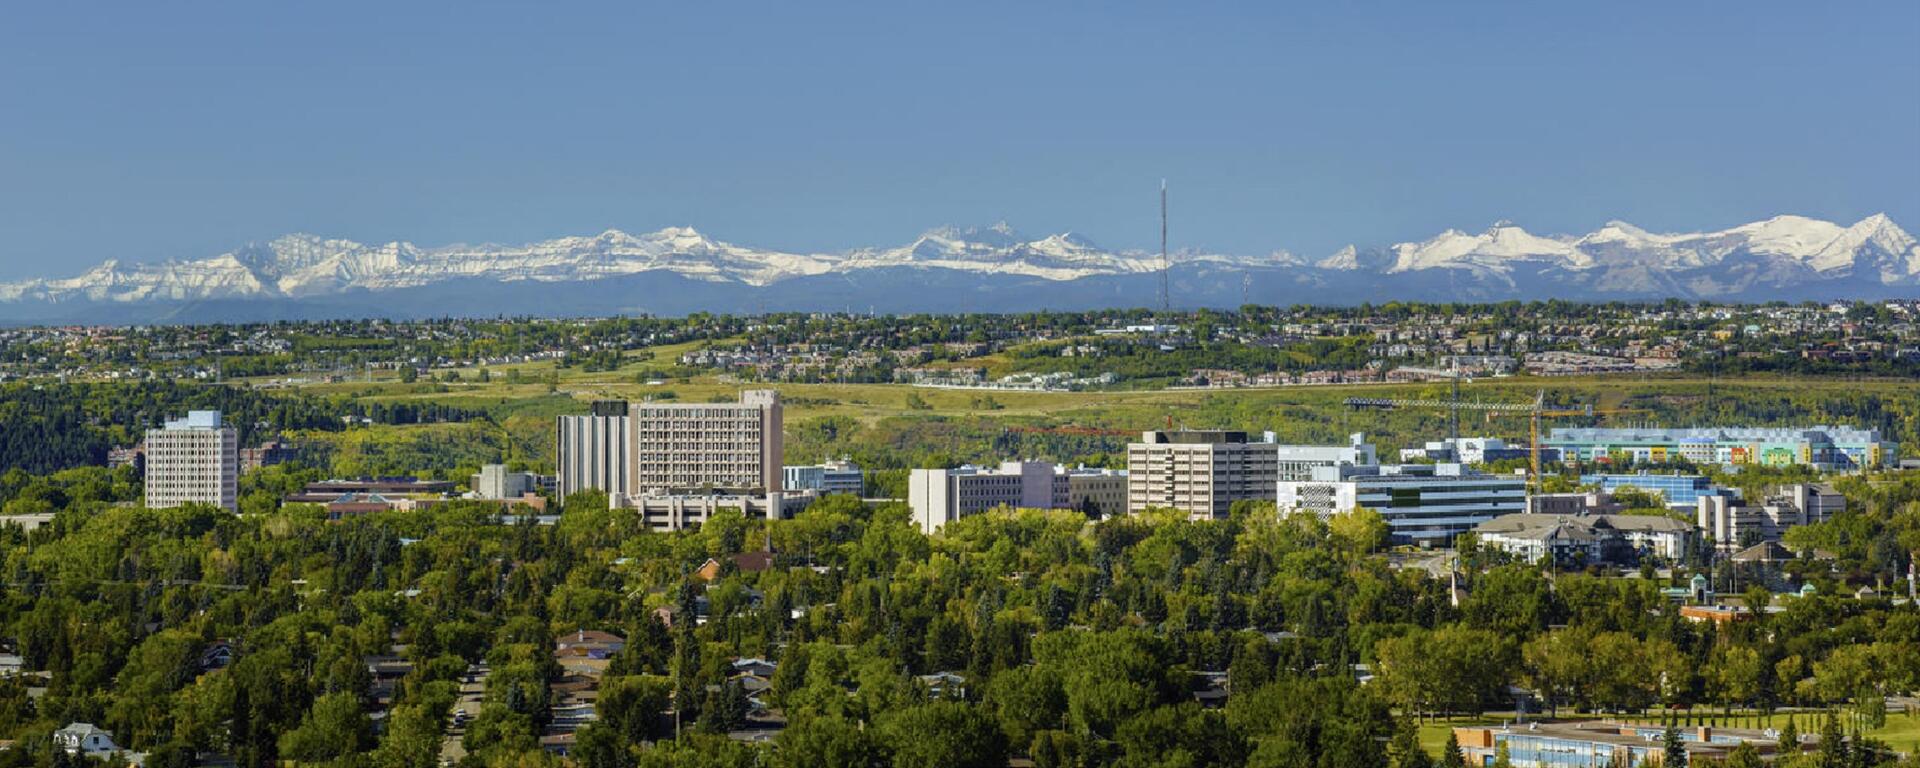 university of calgary with mountains